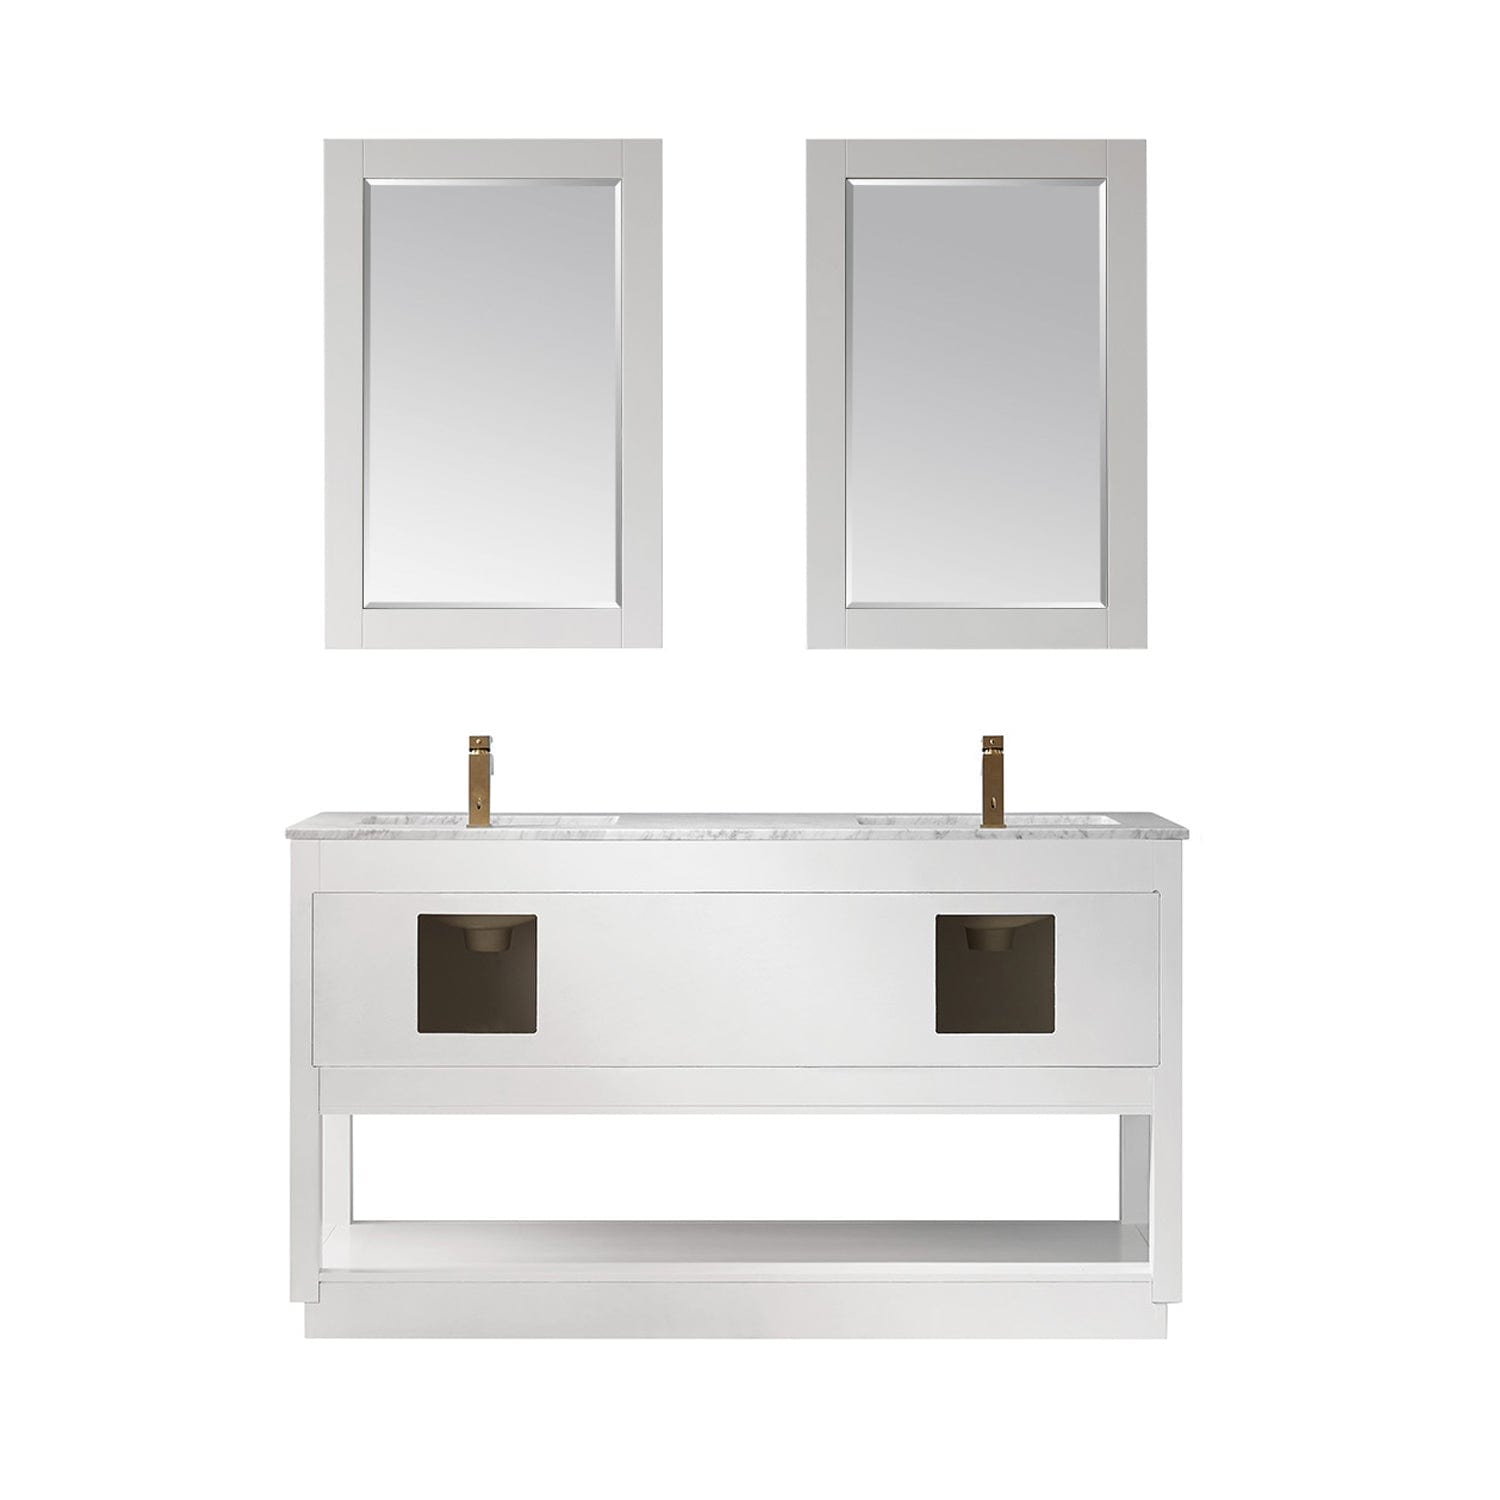 Altair Remi 60" Double Bathroom Vanity Set in White and Carrara White Marble Countertop with Mirror 532060-WH-CA - Molaix631112971553Vanity532060-WH-CA